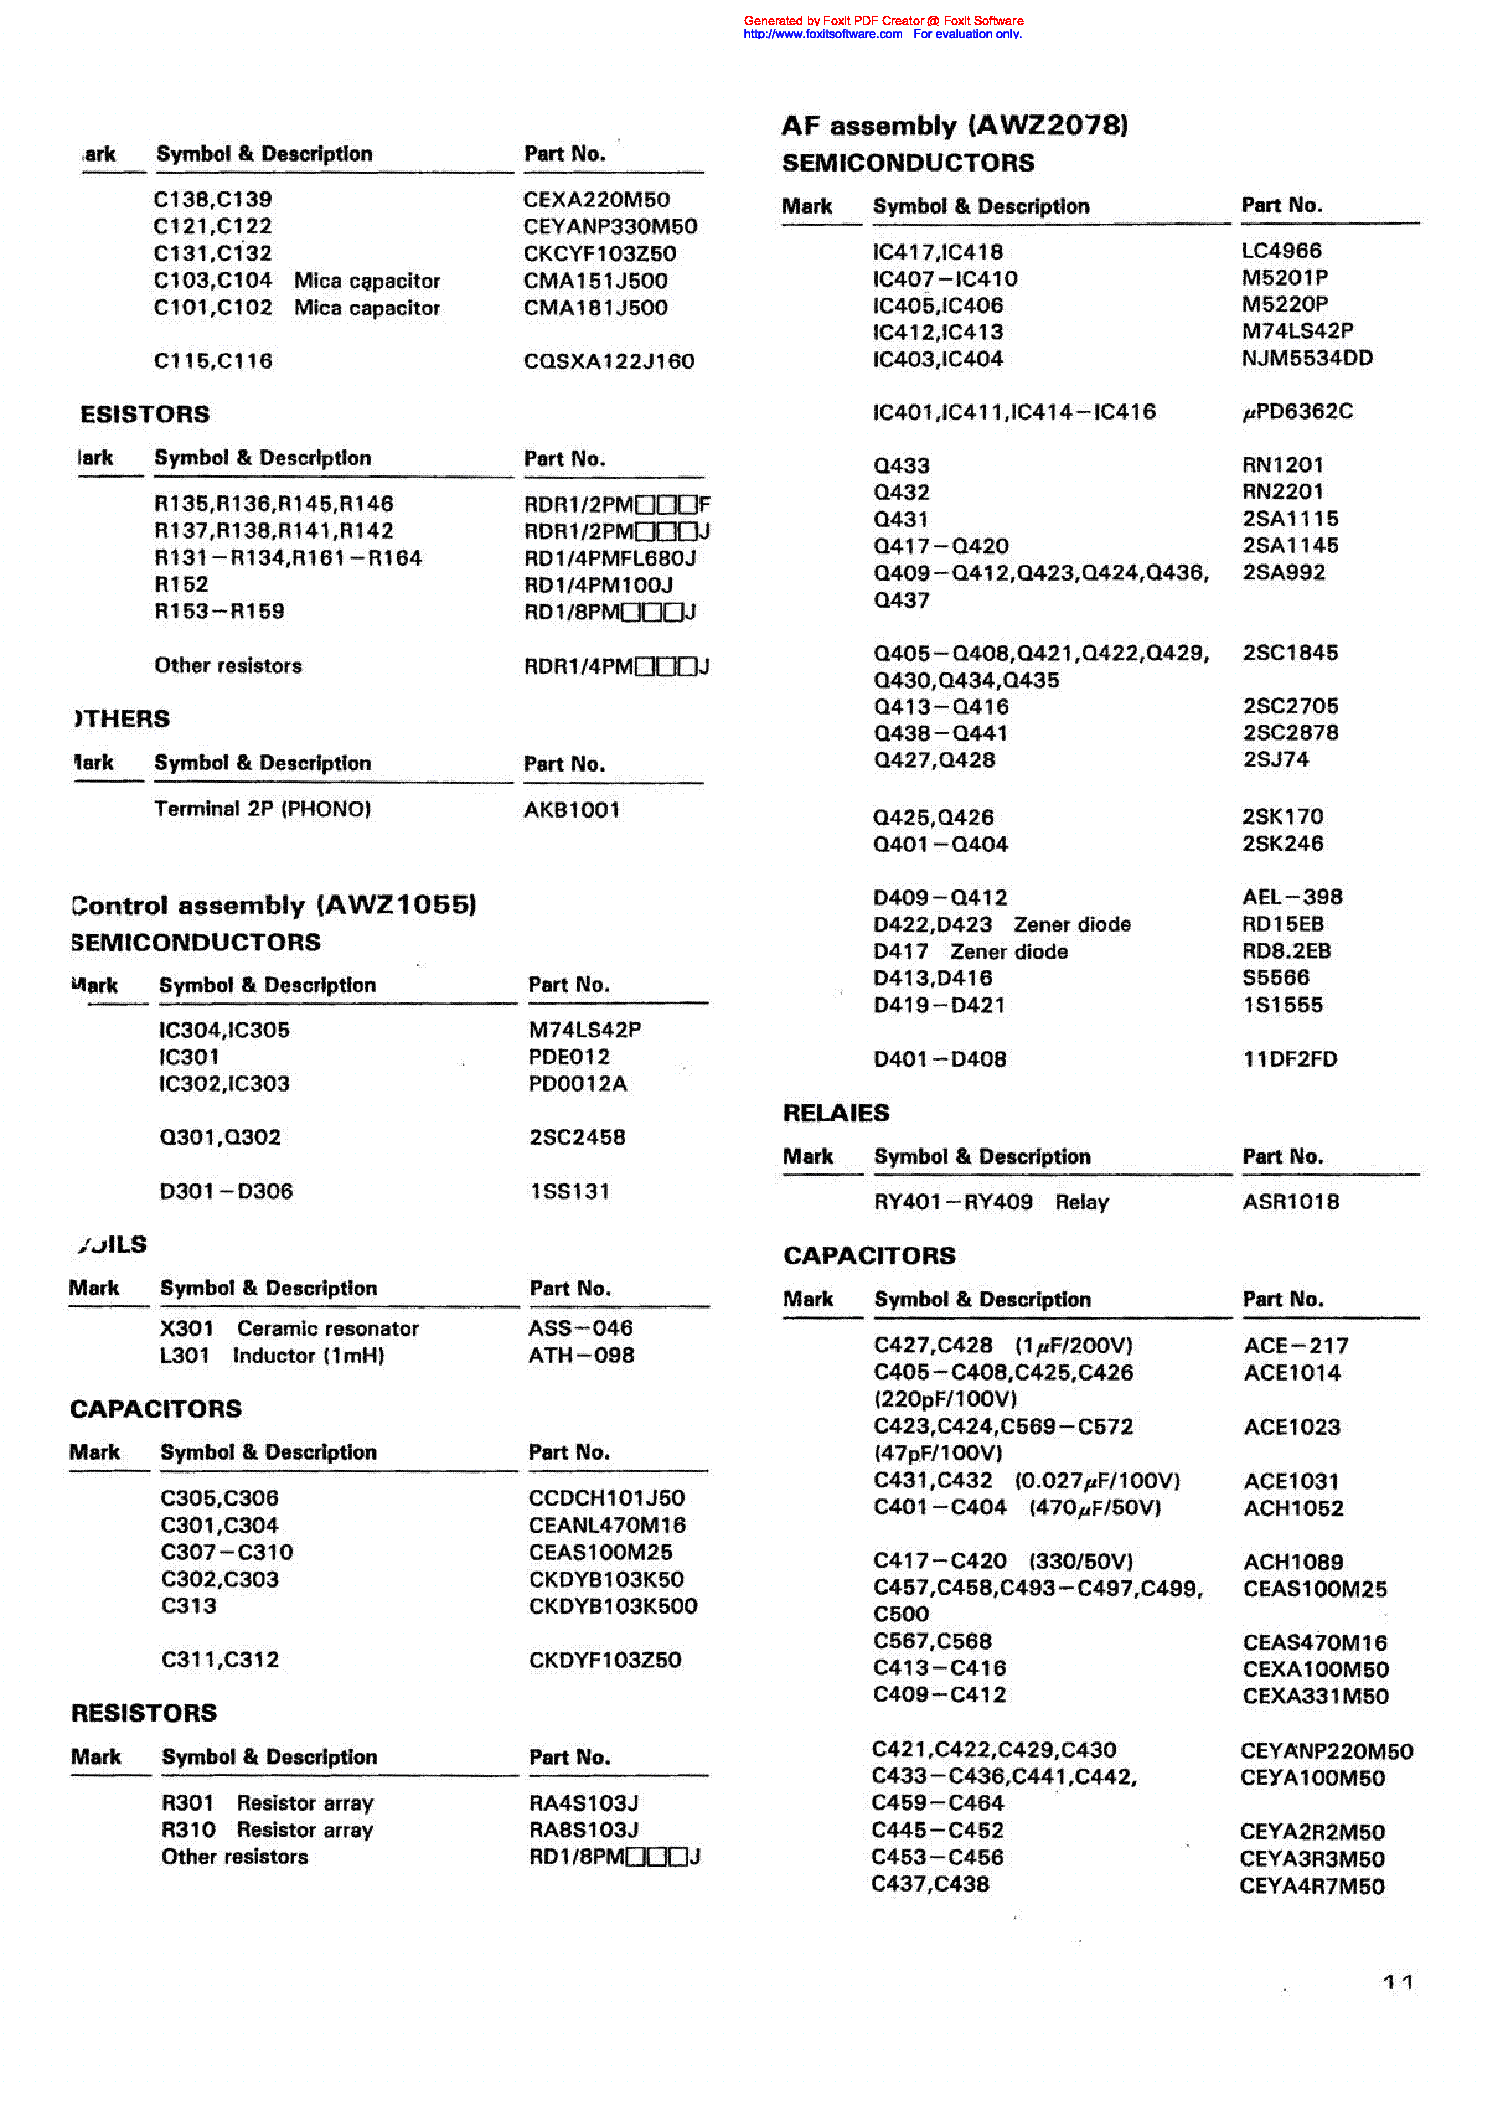 PIONEER C-91 SM service manual (2nd page)